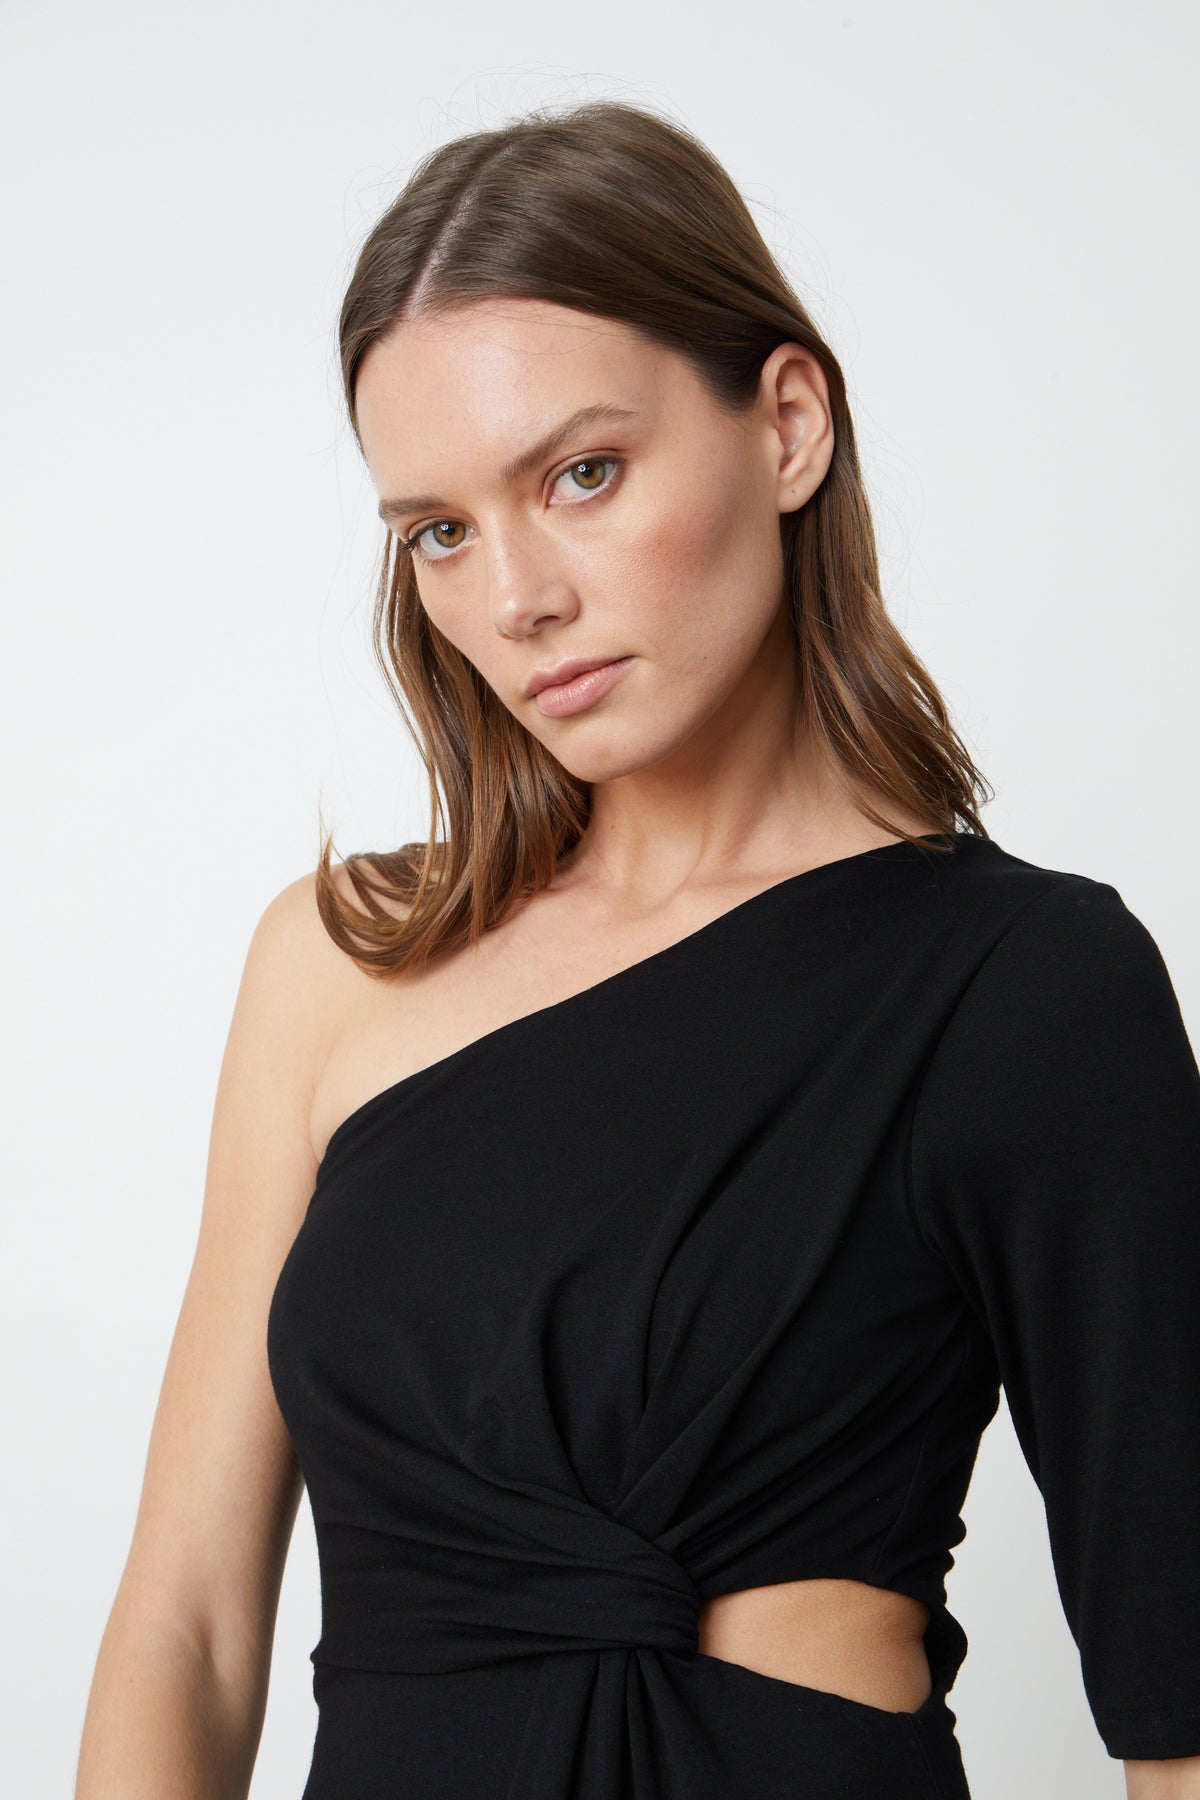   The model is wearing a black CAILIN CUT OUT ONE SHOULDER DRESS by Velvet by Graham & Spencer. 